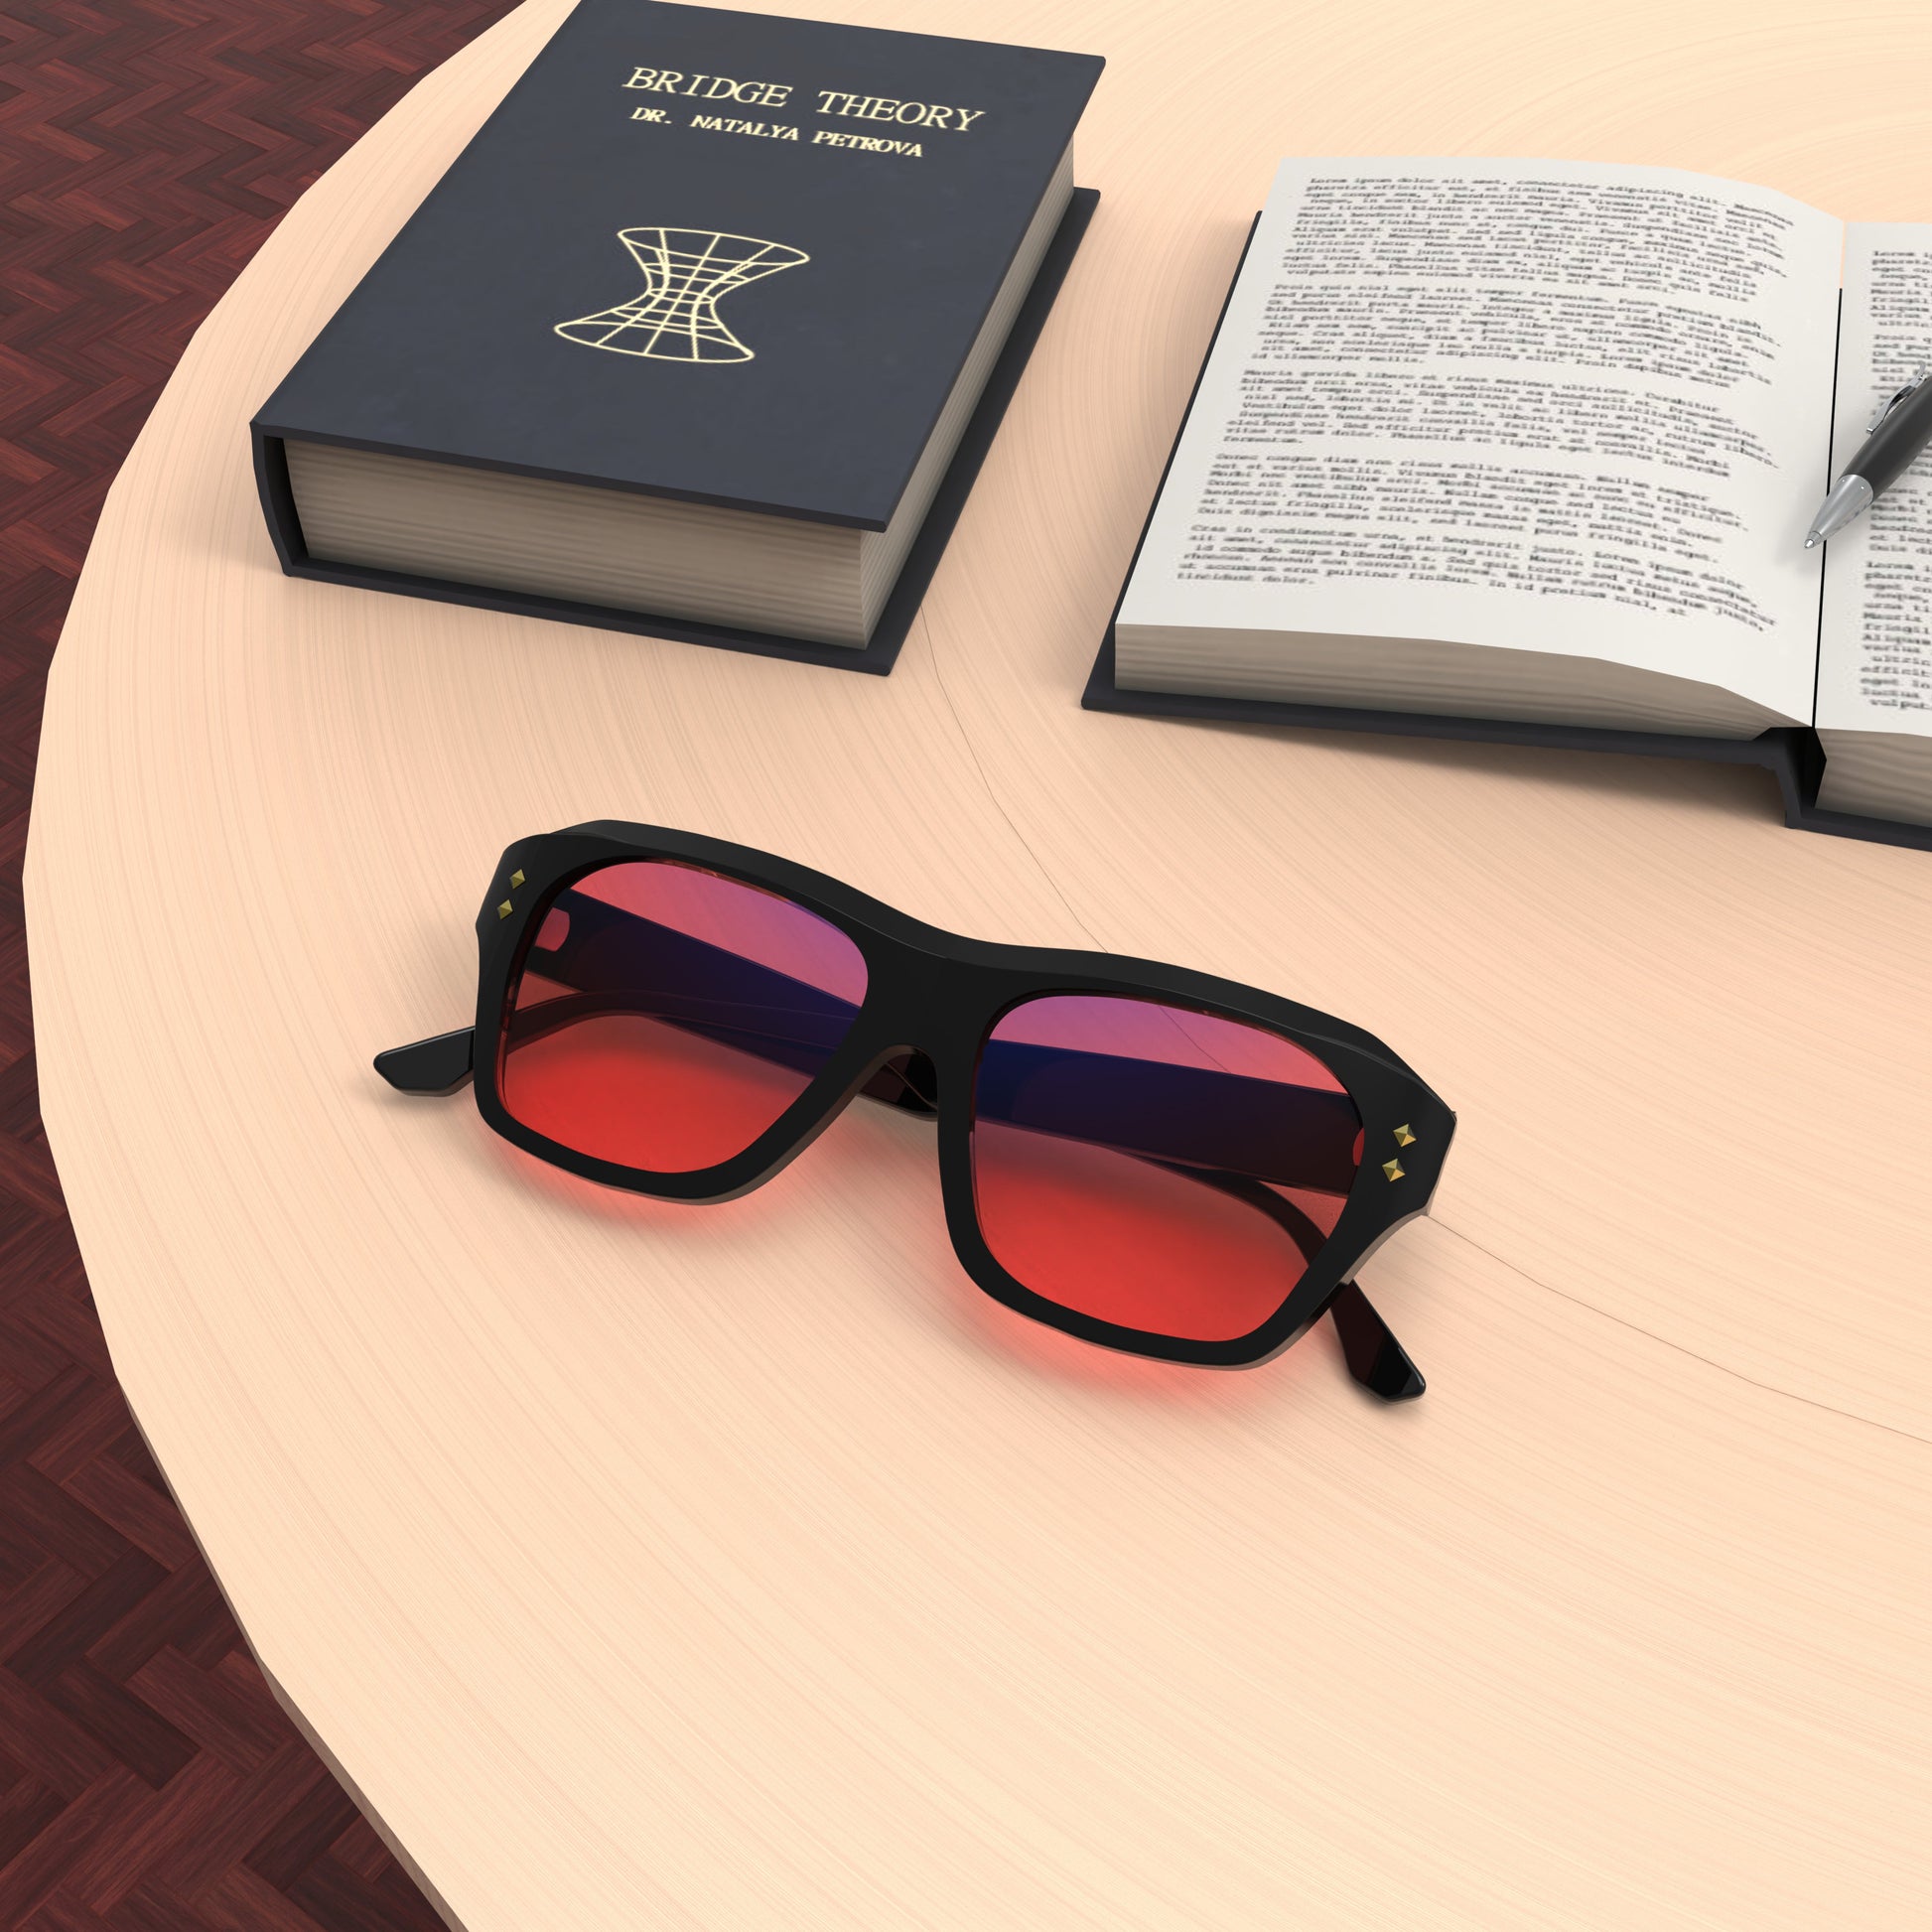 Lifestyle Lenses View of Sleepaxa Celestial FL-41 Migraine Glasses with black frame, Acetate temples, and rose-tinted lenses with blue block and blue anti reflection properties , designed with smooth high-quality Acetate frame material for Migraine & Light Sensitivity